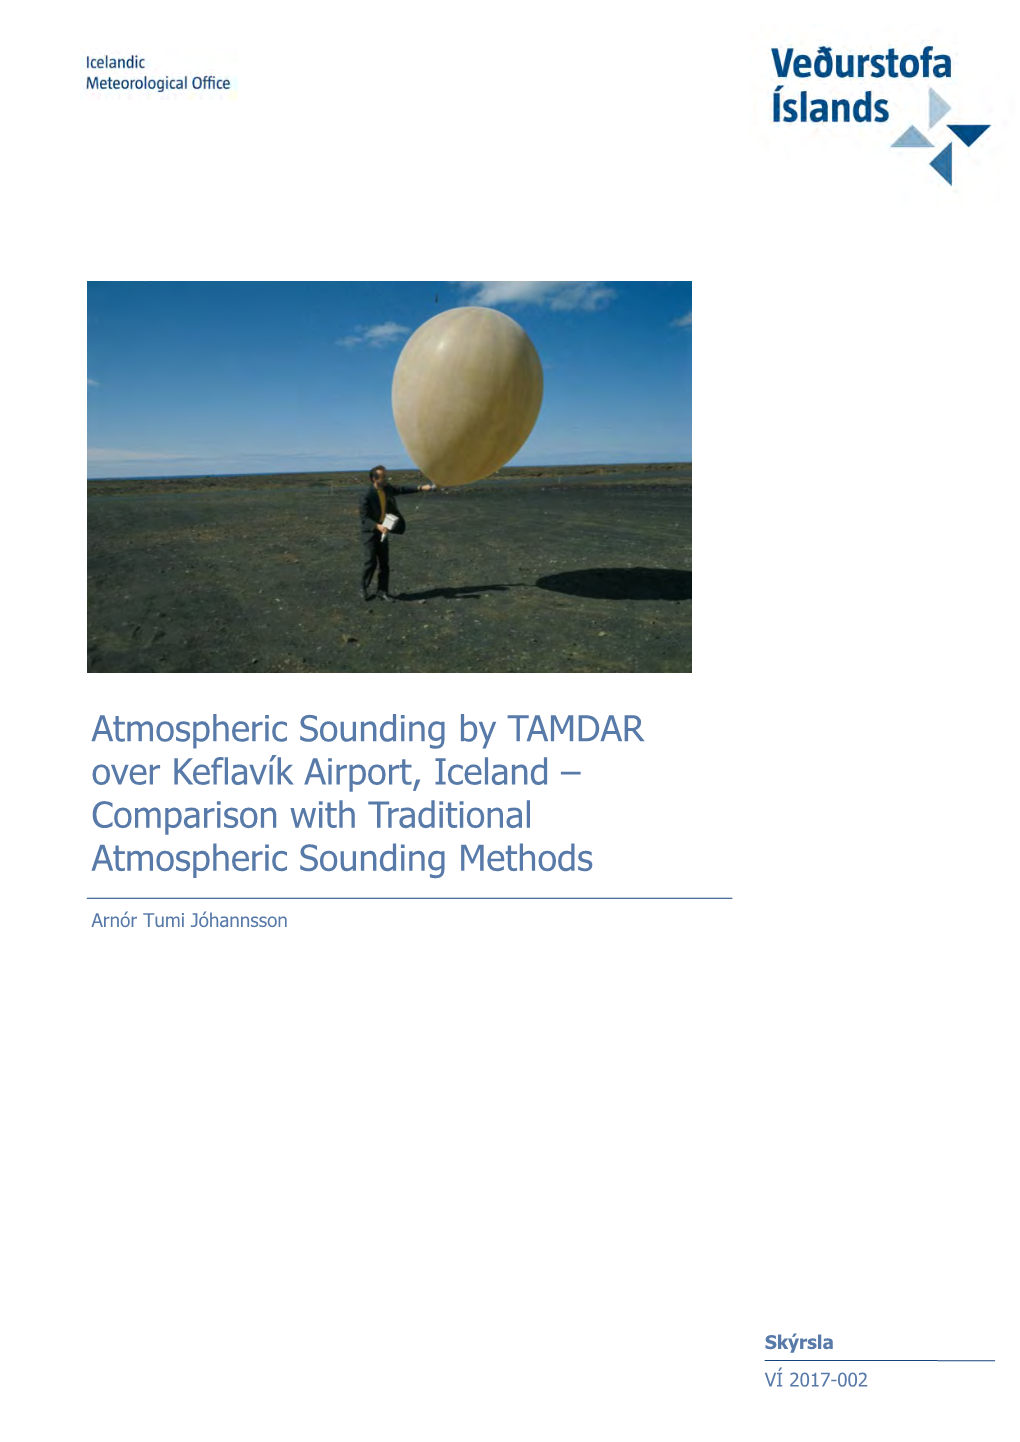 Atmospheric Sounding by TAMDAR Over Keflavík Airport, Iceland – Comparison with Traditional Atmospheric Sounding Methods